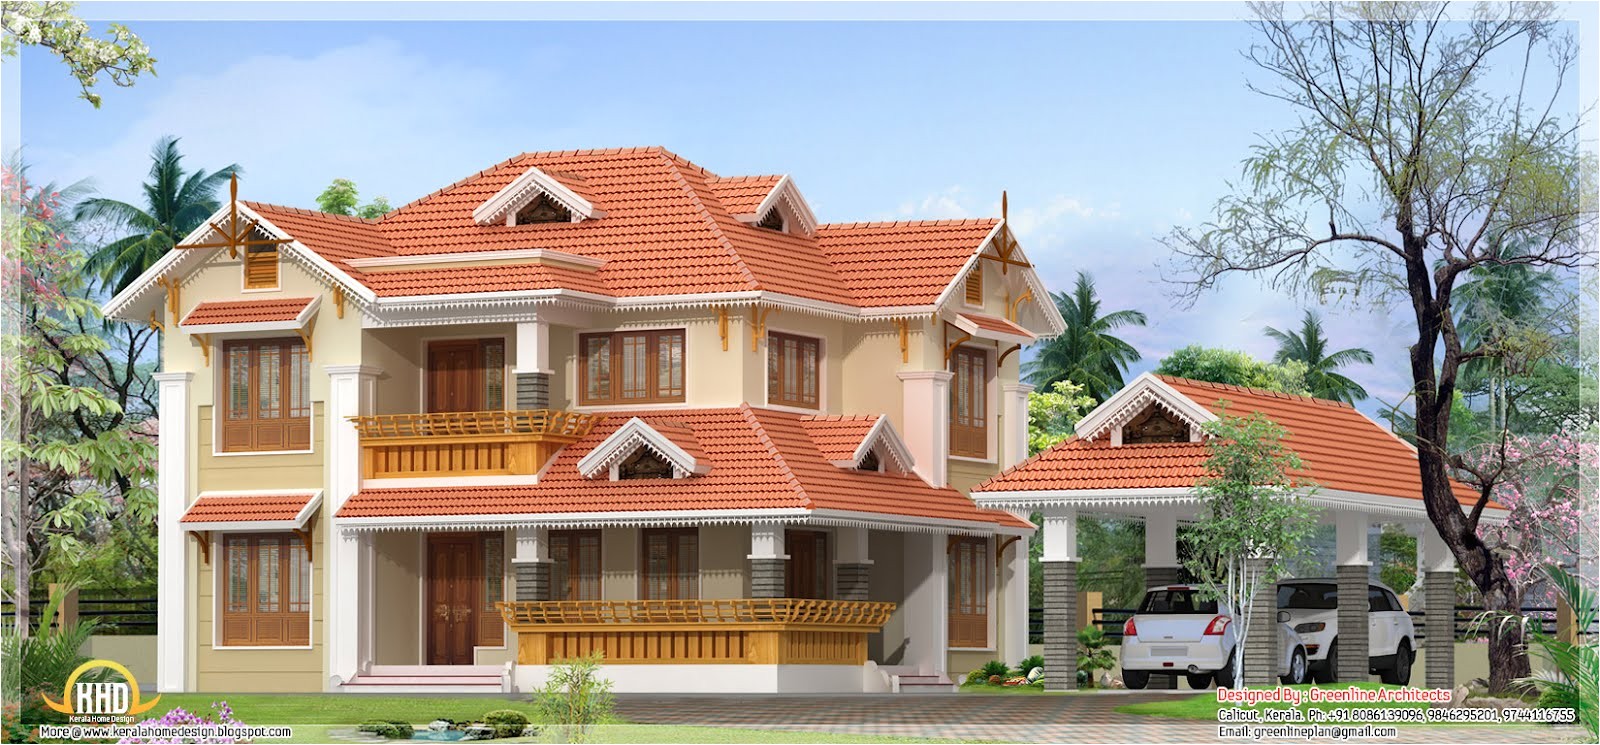 awesome kerala home design with 4